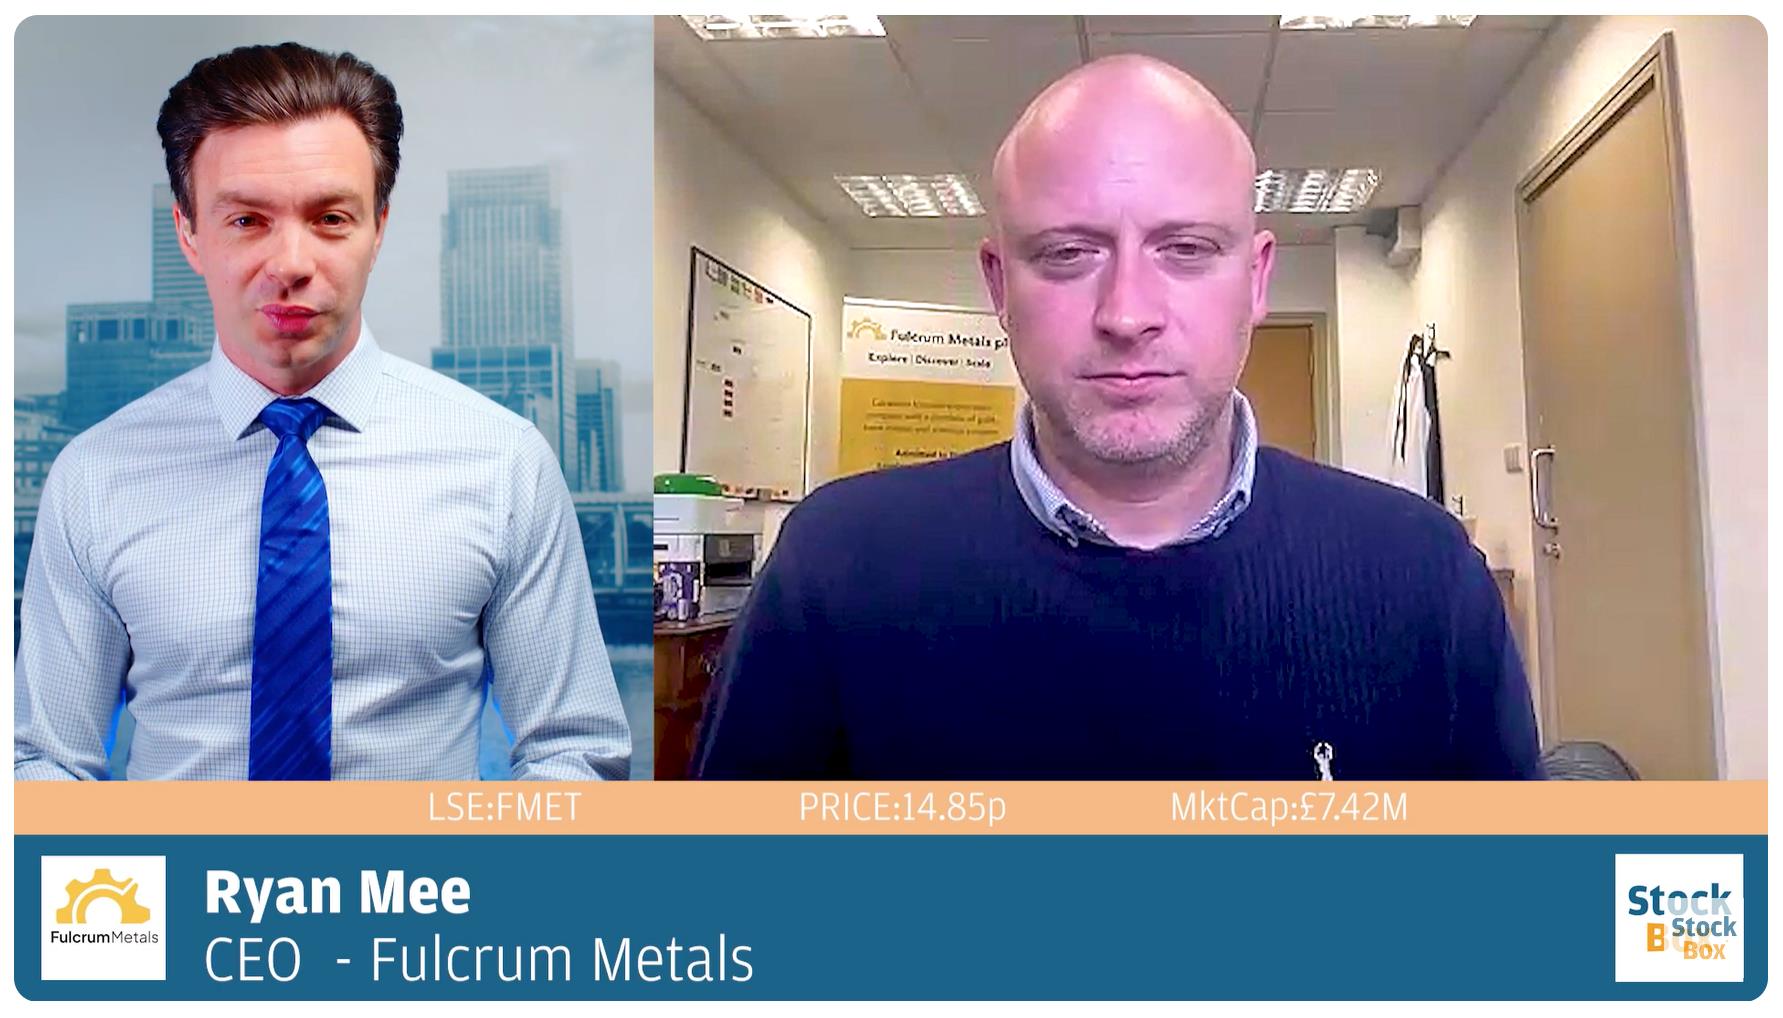 Fulcrum Metals Push On with Gold Tailings in ontario After Seeing 60% Recovery Rates  Share Talk [Video]